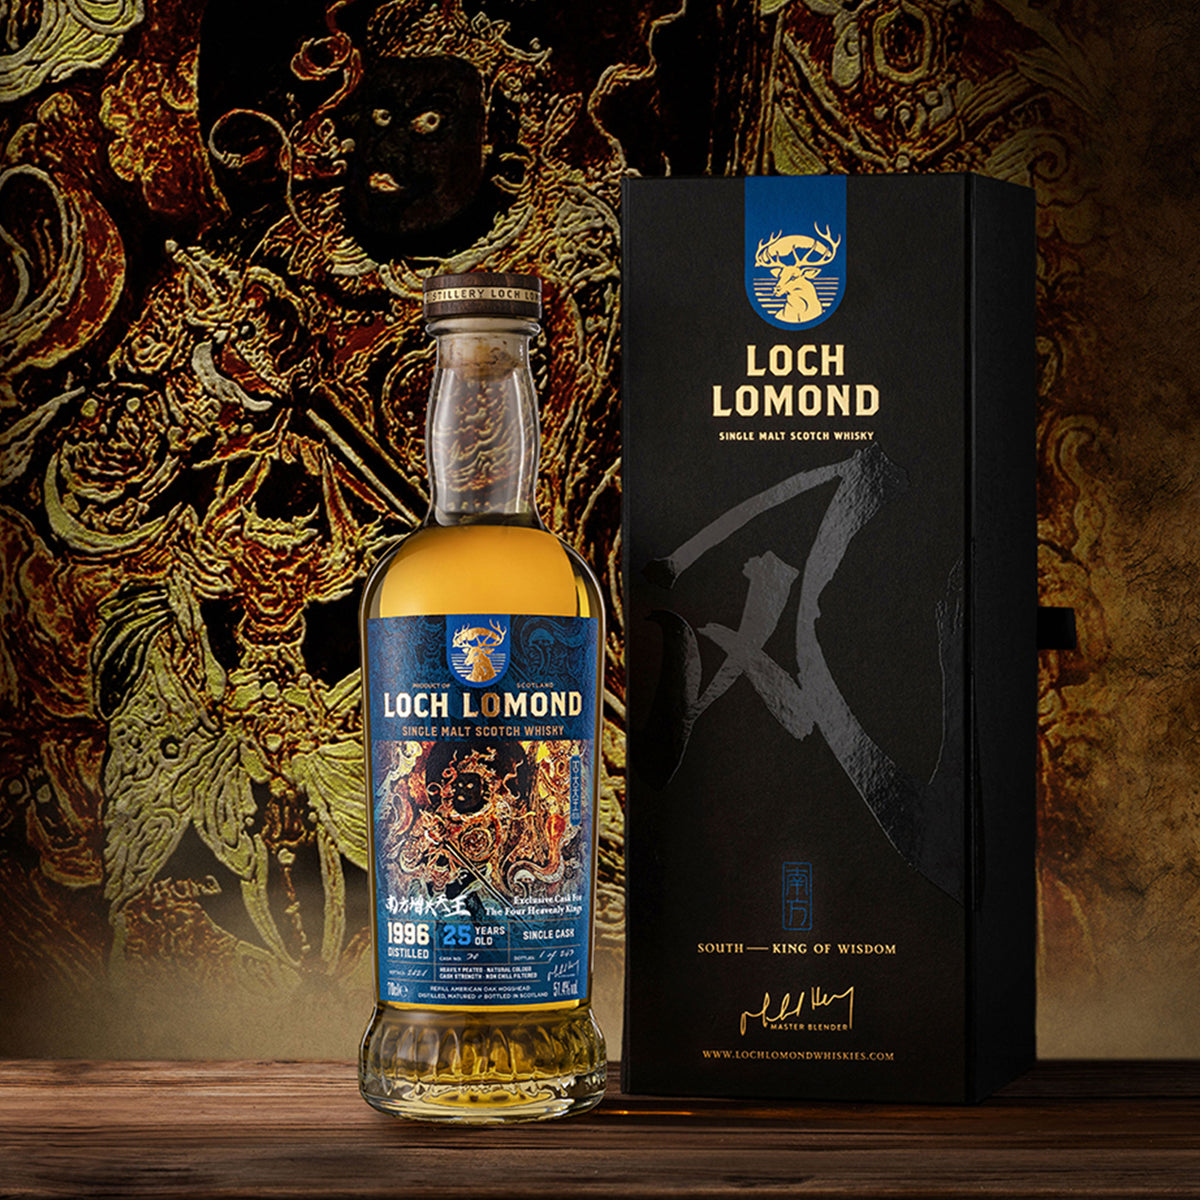 South King of Wisdom 25 Year Old Single Malt Whisky